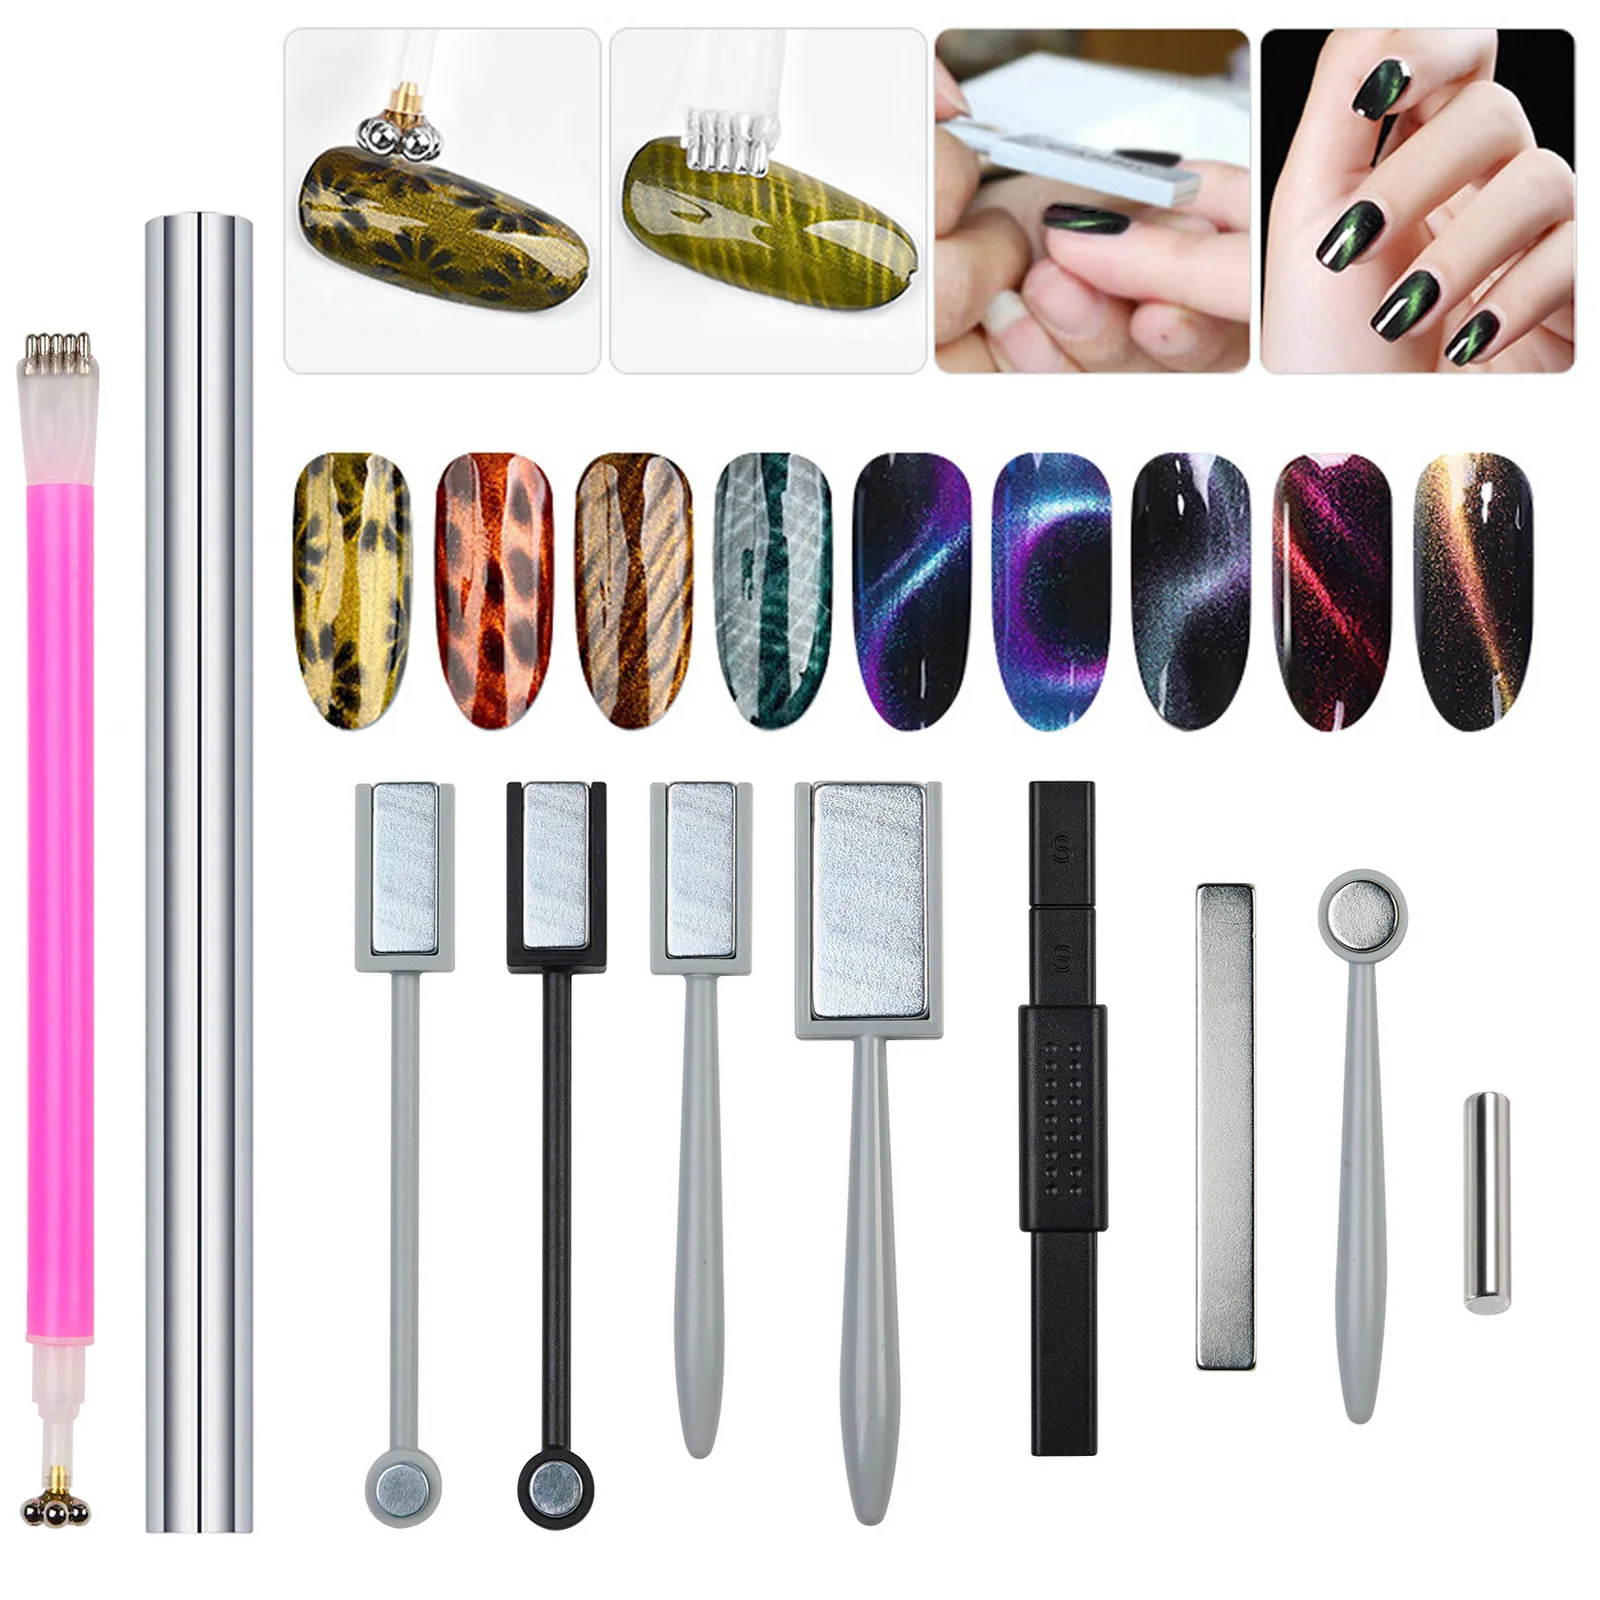 Strong Cat Magnetic Stick UV Gel Polish vernice Nails Art Decoration French Multi-Function Magnet Pen Painting Gel Manicure Tool